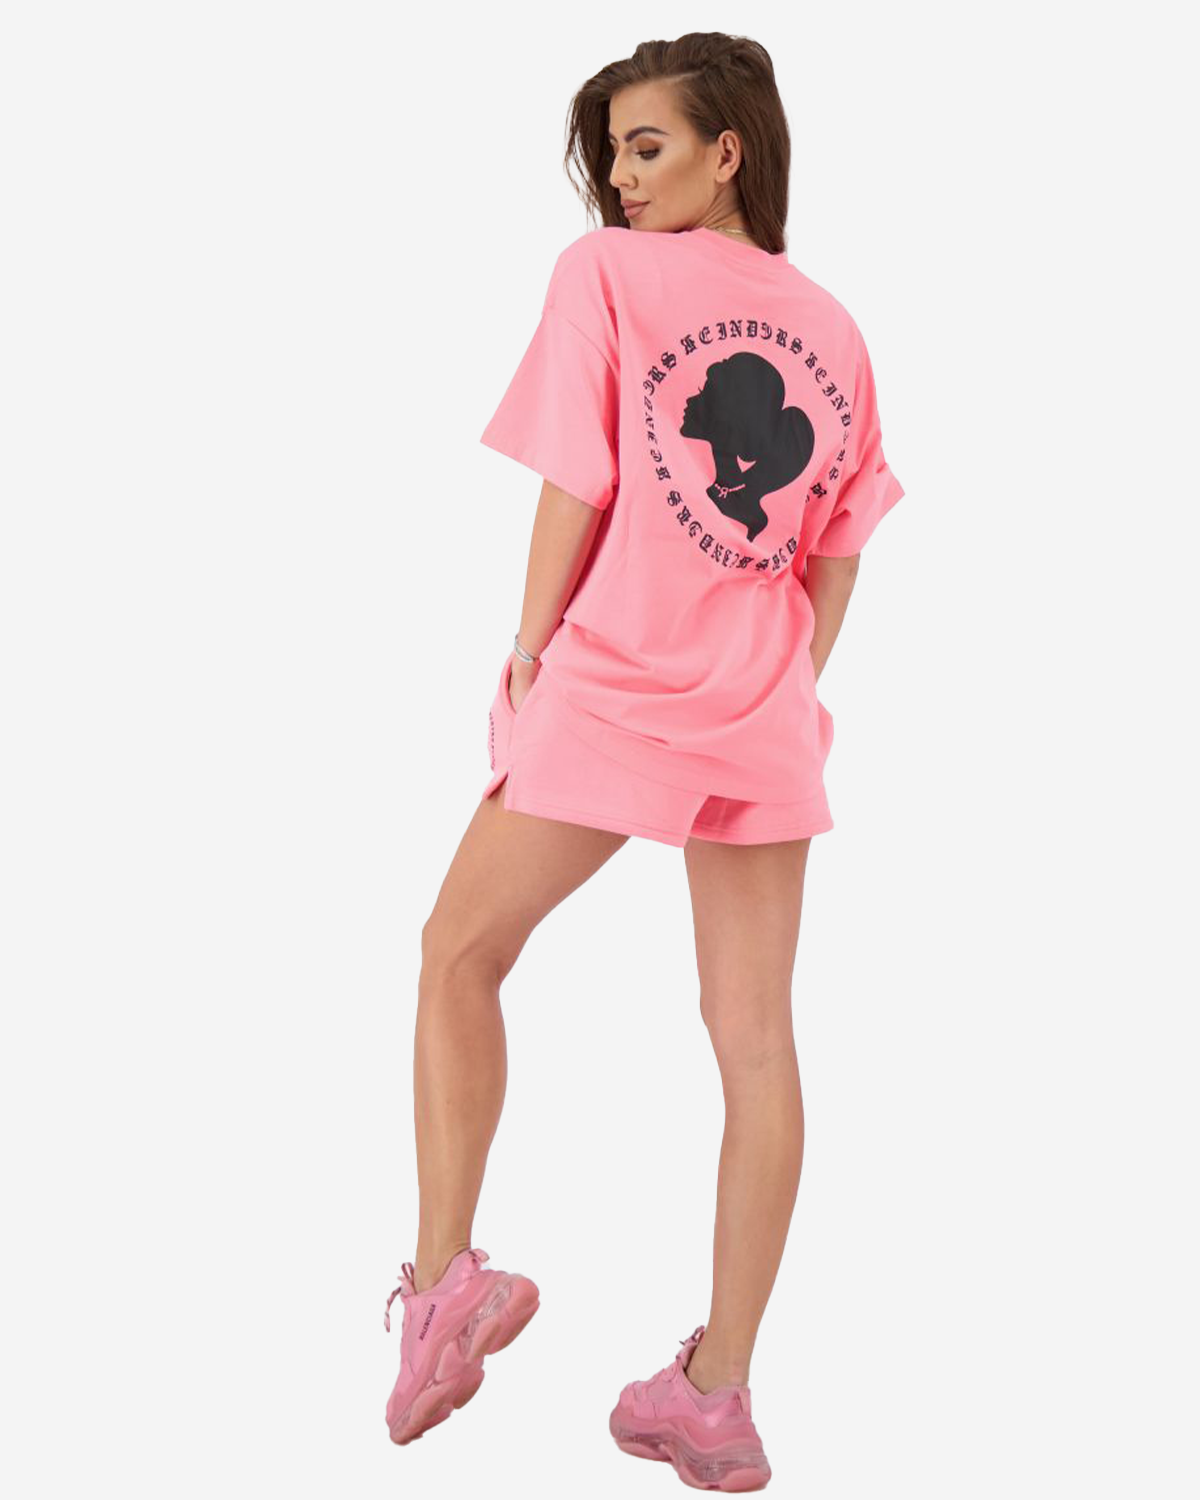 Reinders Sterre T-shirt Pink Carnation